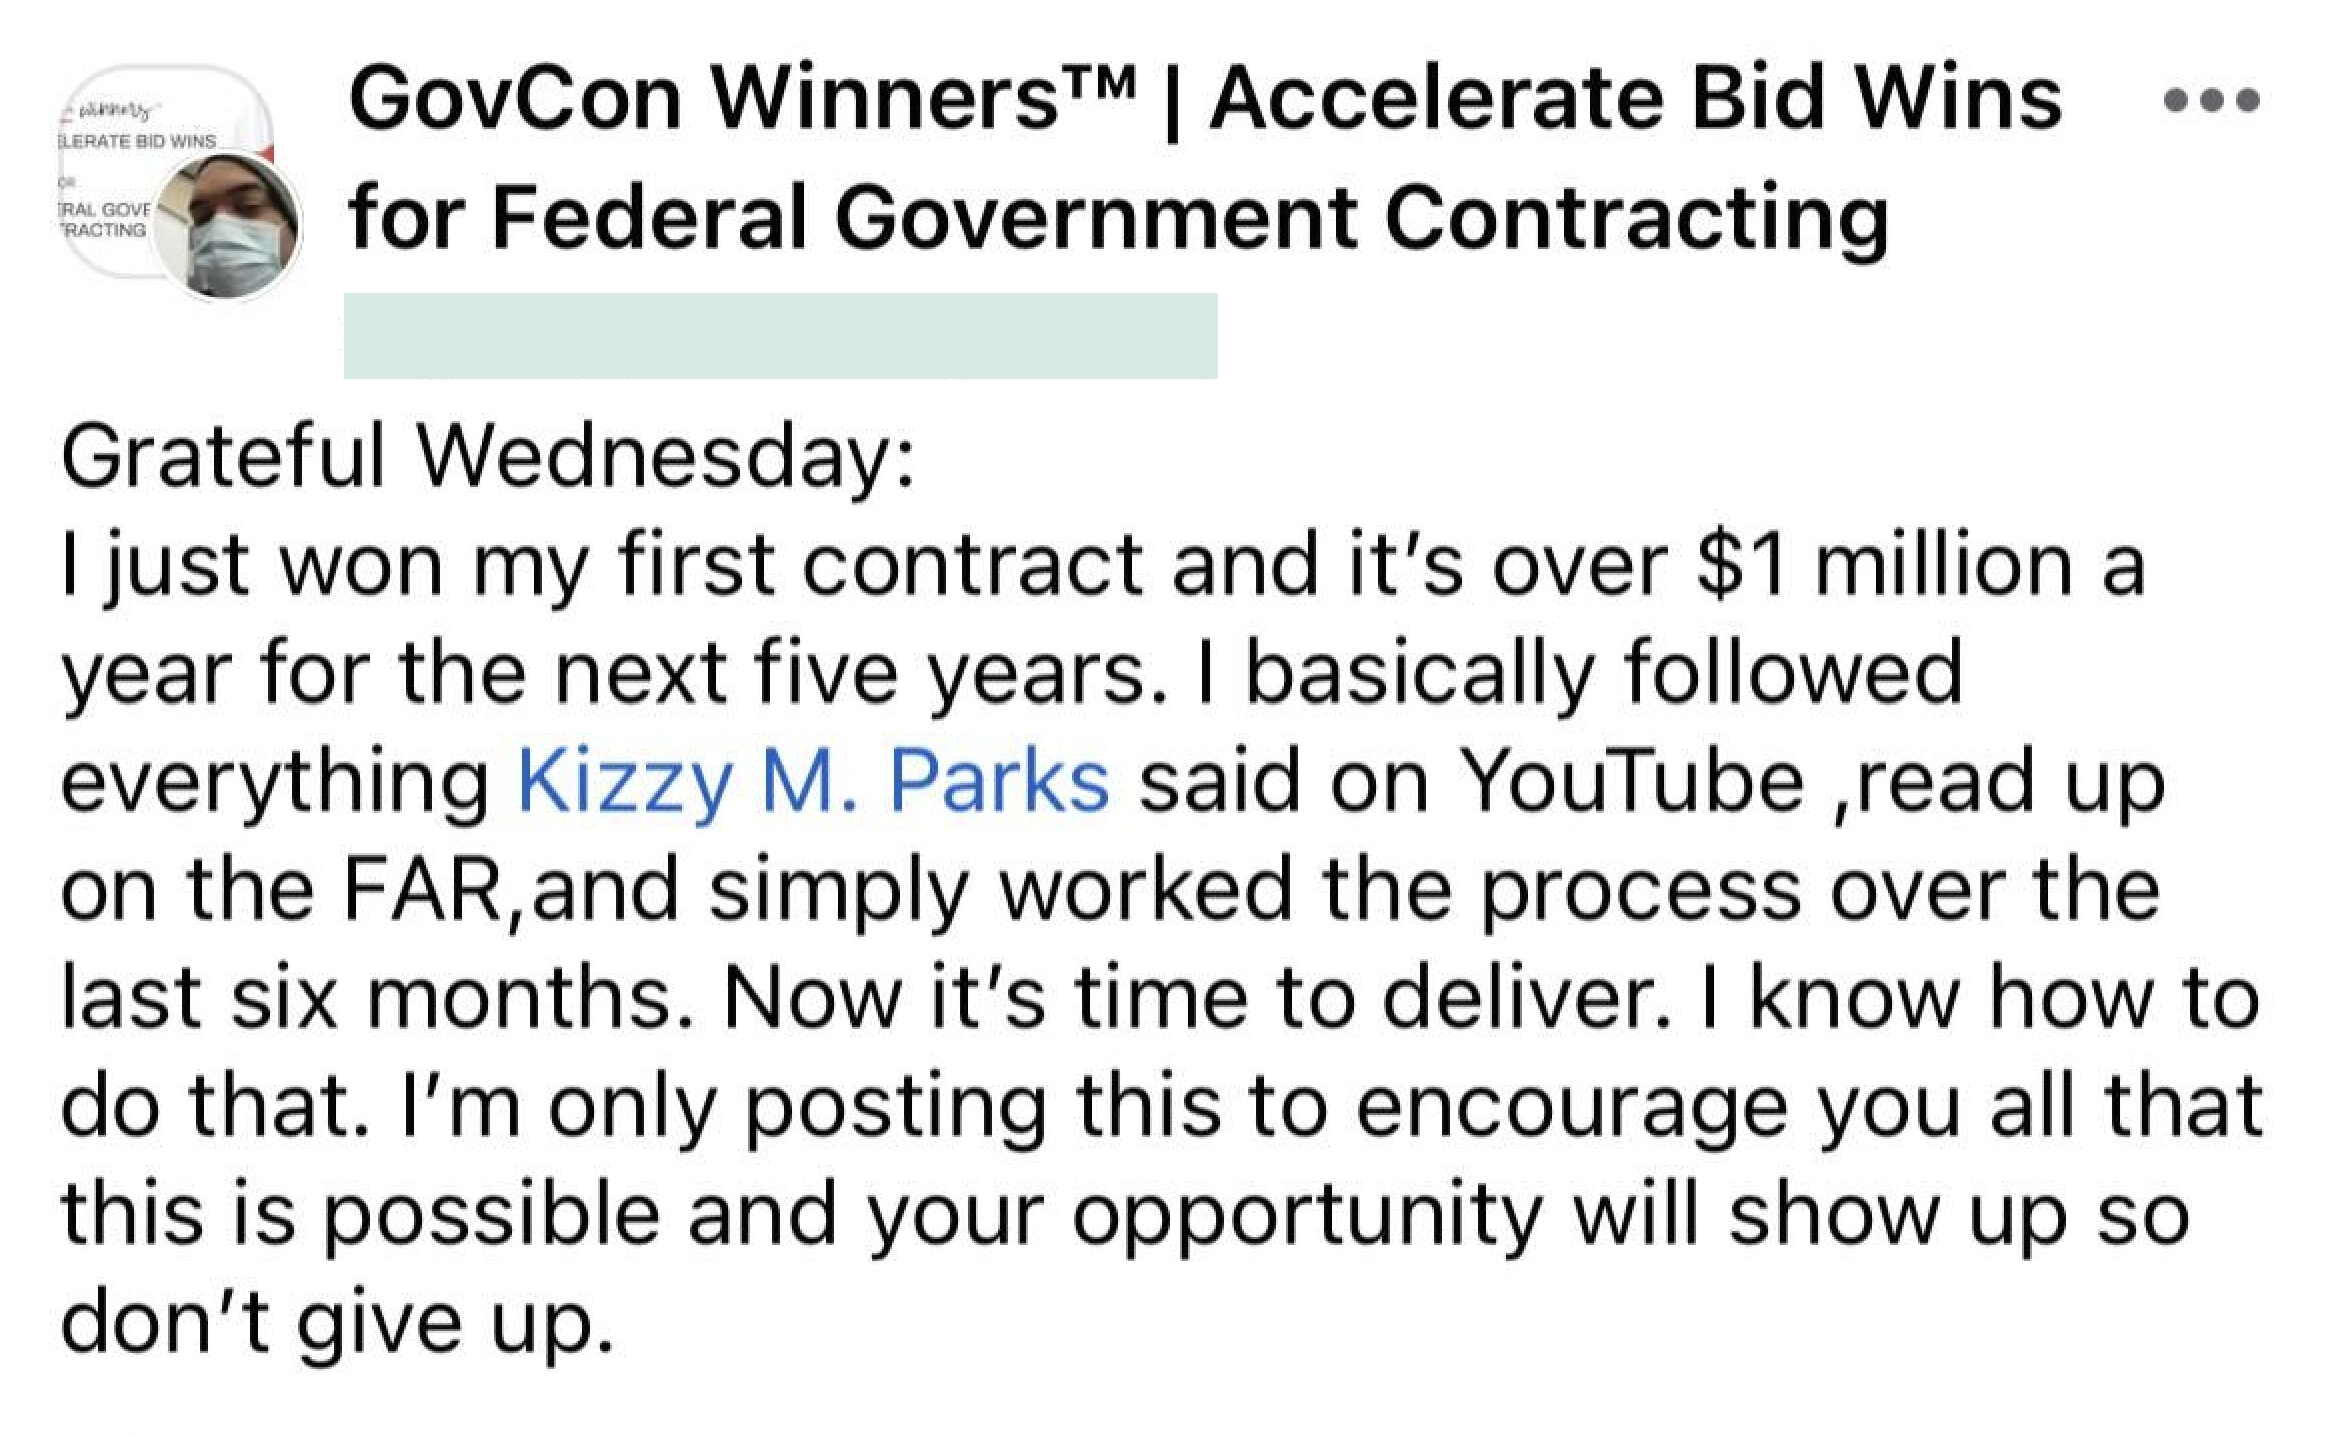 A text message that says gov winners accelerate bids for federal government contracting.